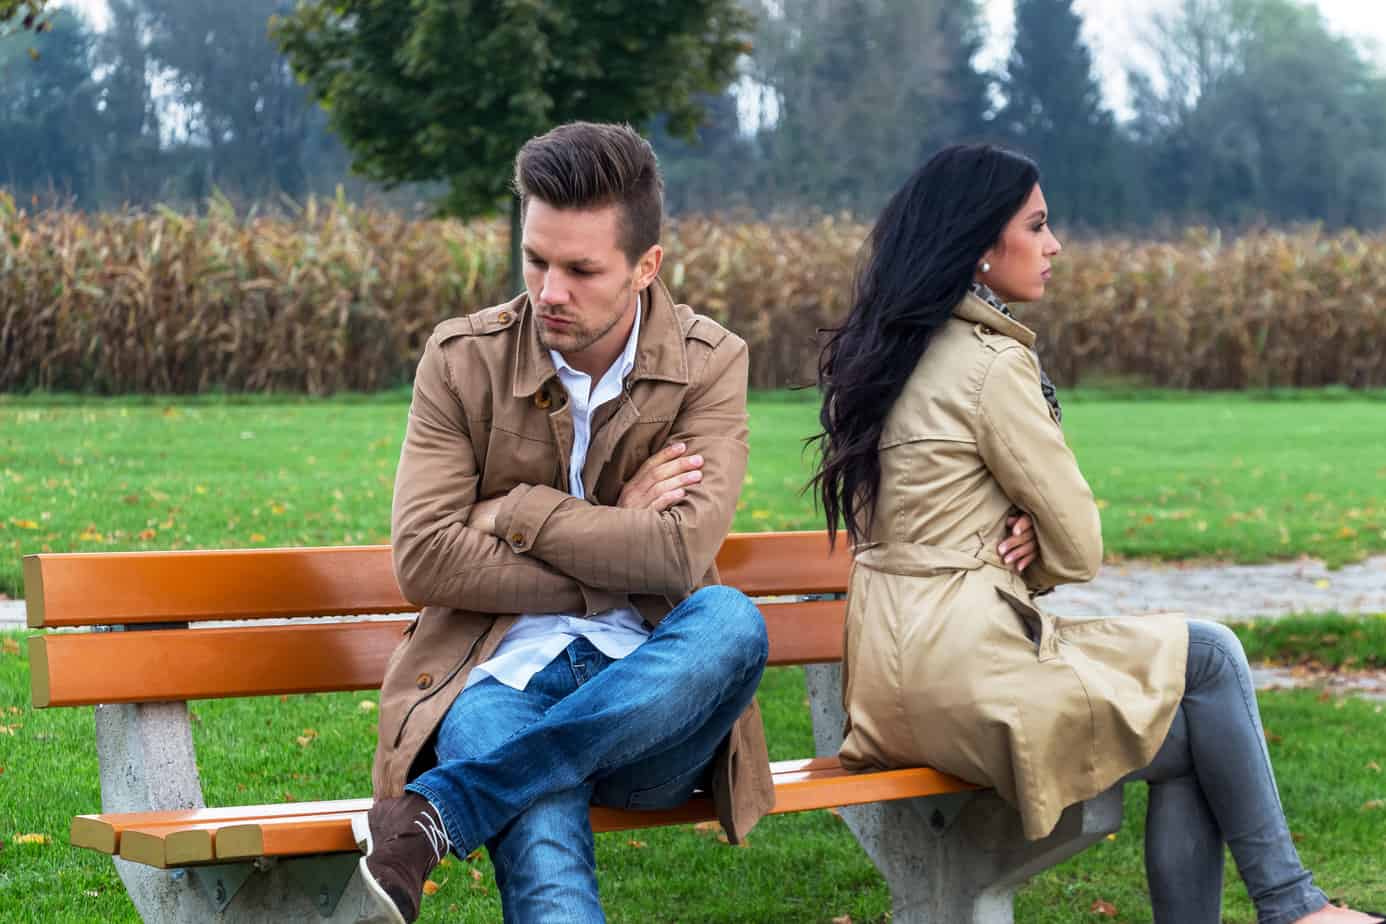 A man and woman sitting on a bench in a park